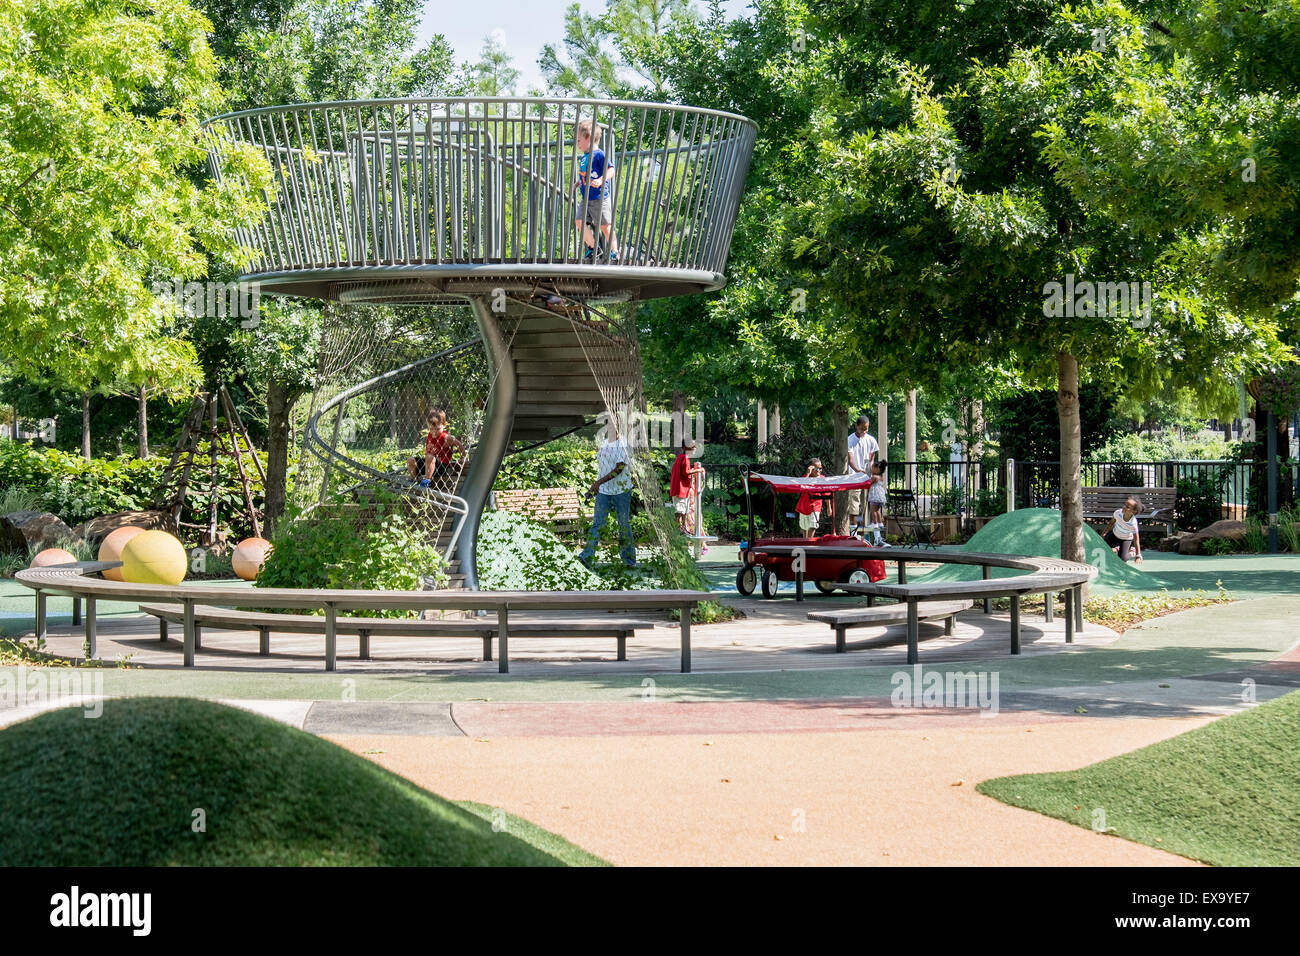 Part of the Children's Garden and playground at the Myriad Botanical Gardens in Oklahoma City, Oklahoma, USA. Stock Photo